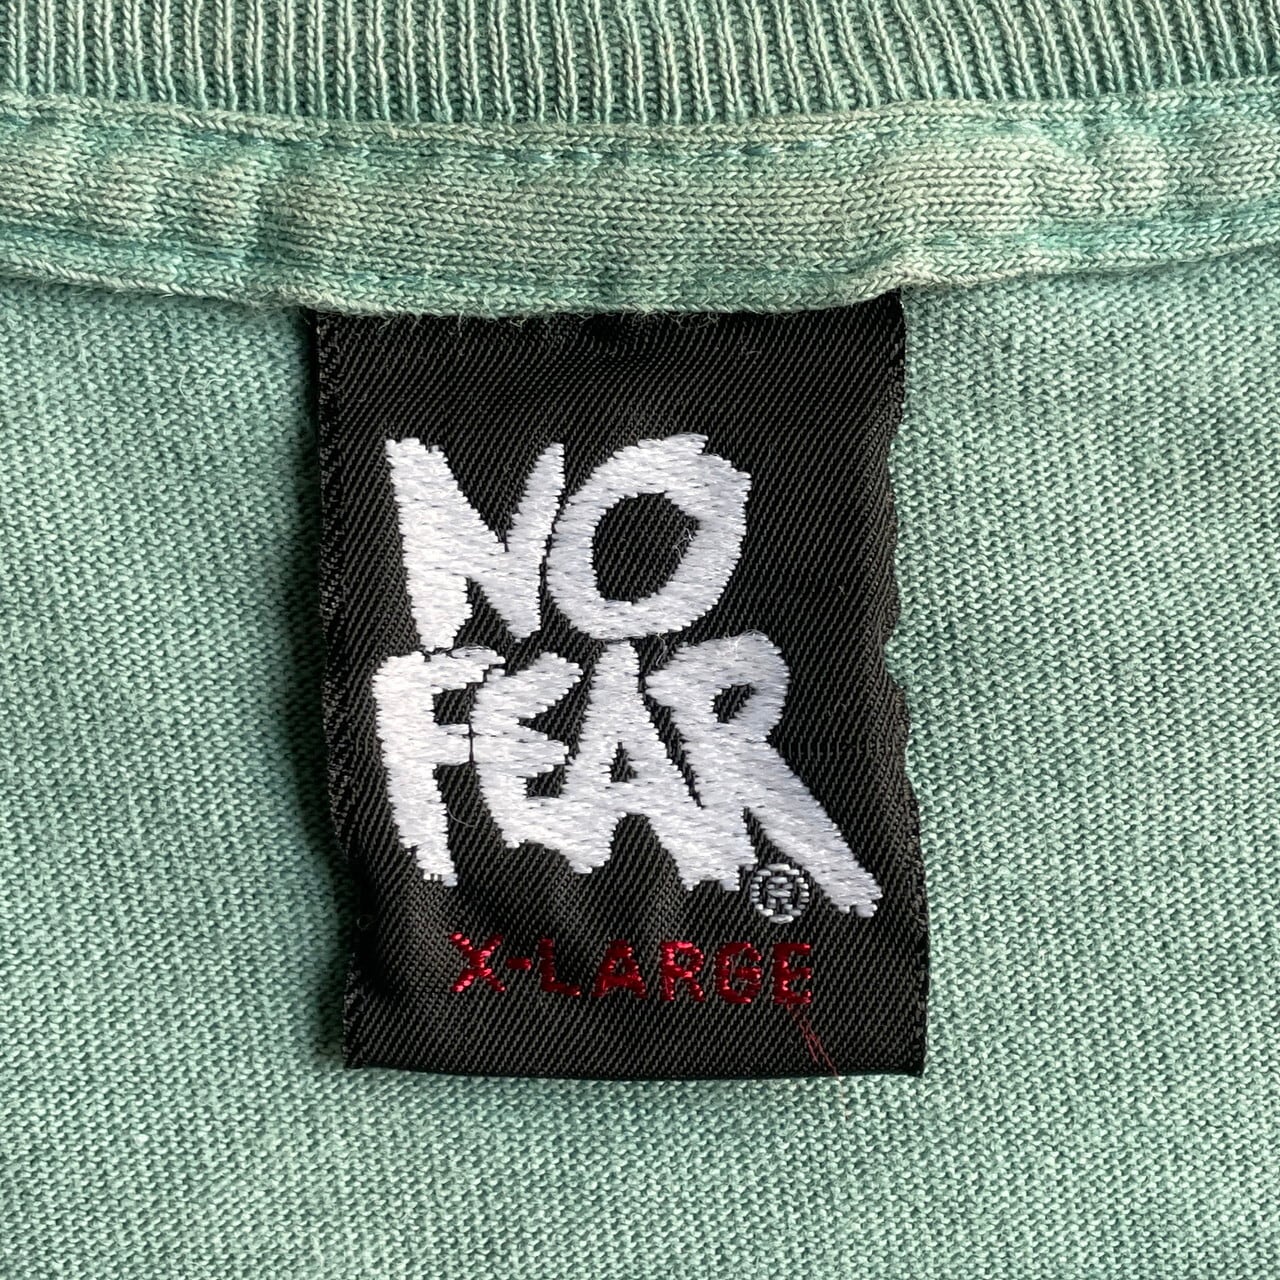 no fear ロンT 90s  ボーダー　レア